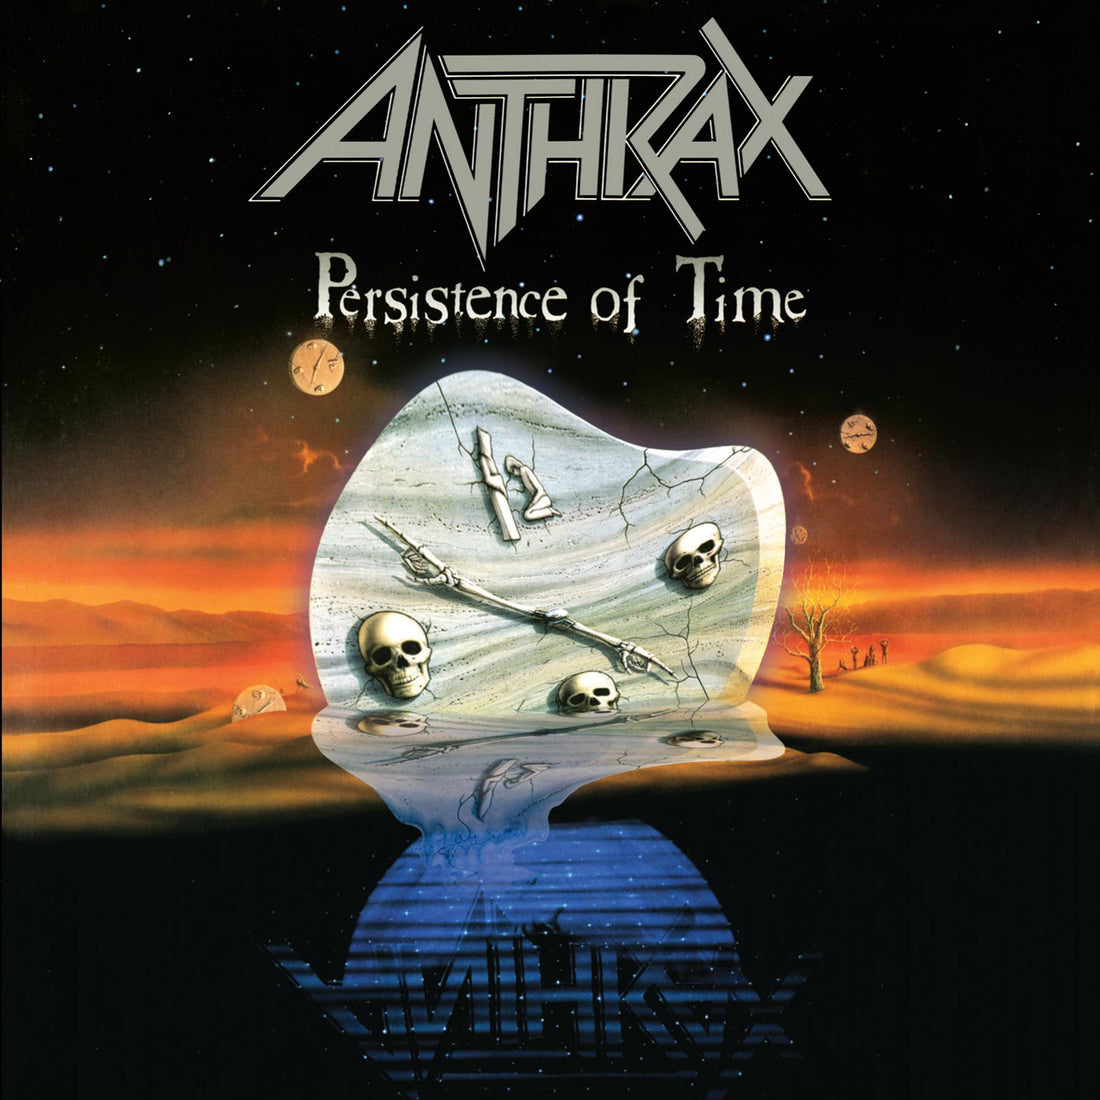 Anthrax - Persistence Of Time released 31 years ago Official Merchandise Store